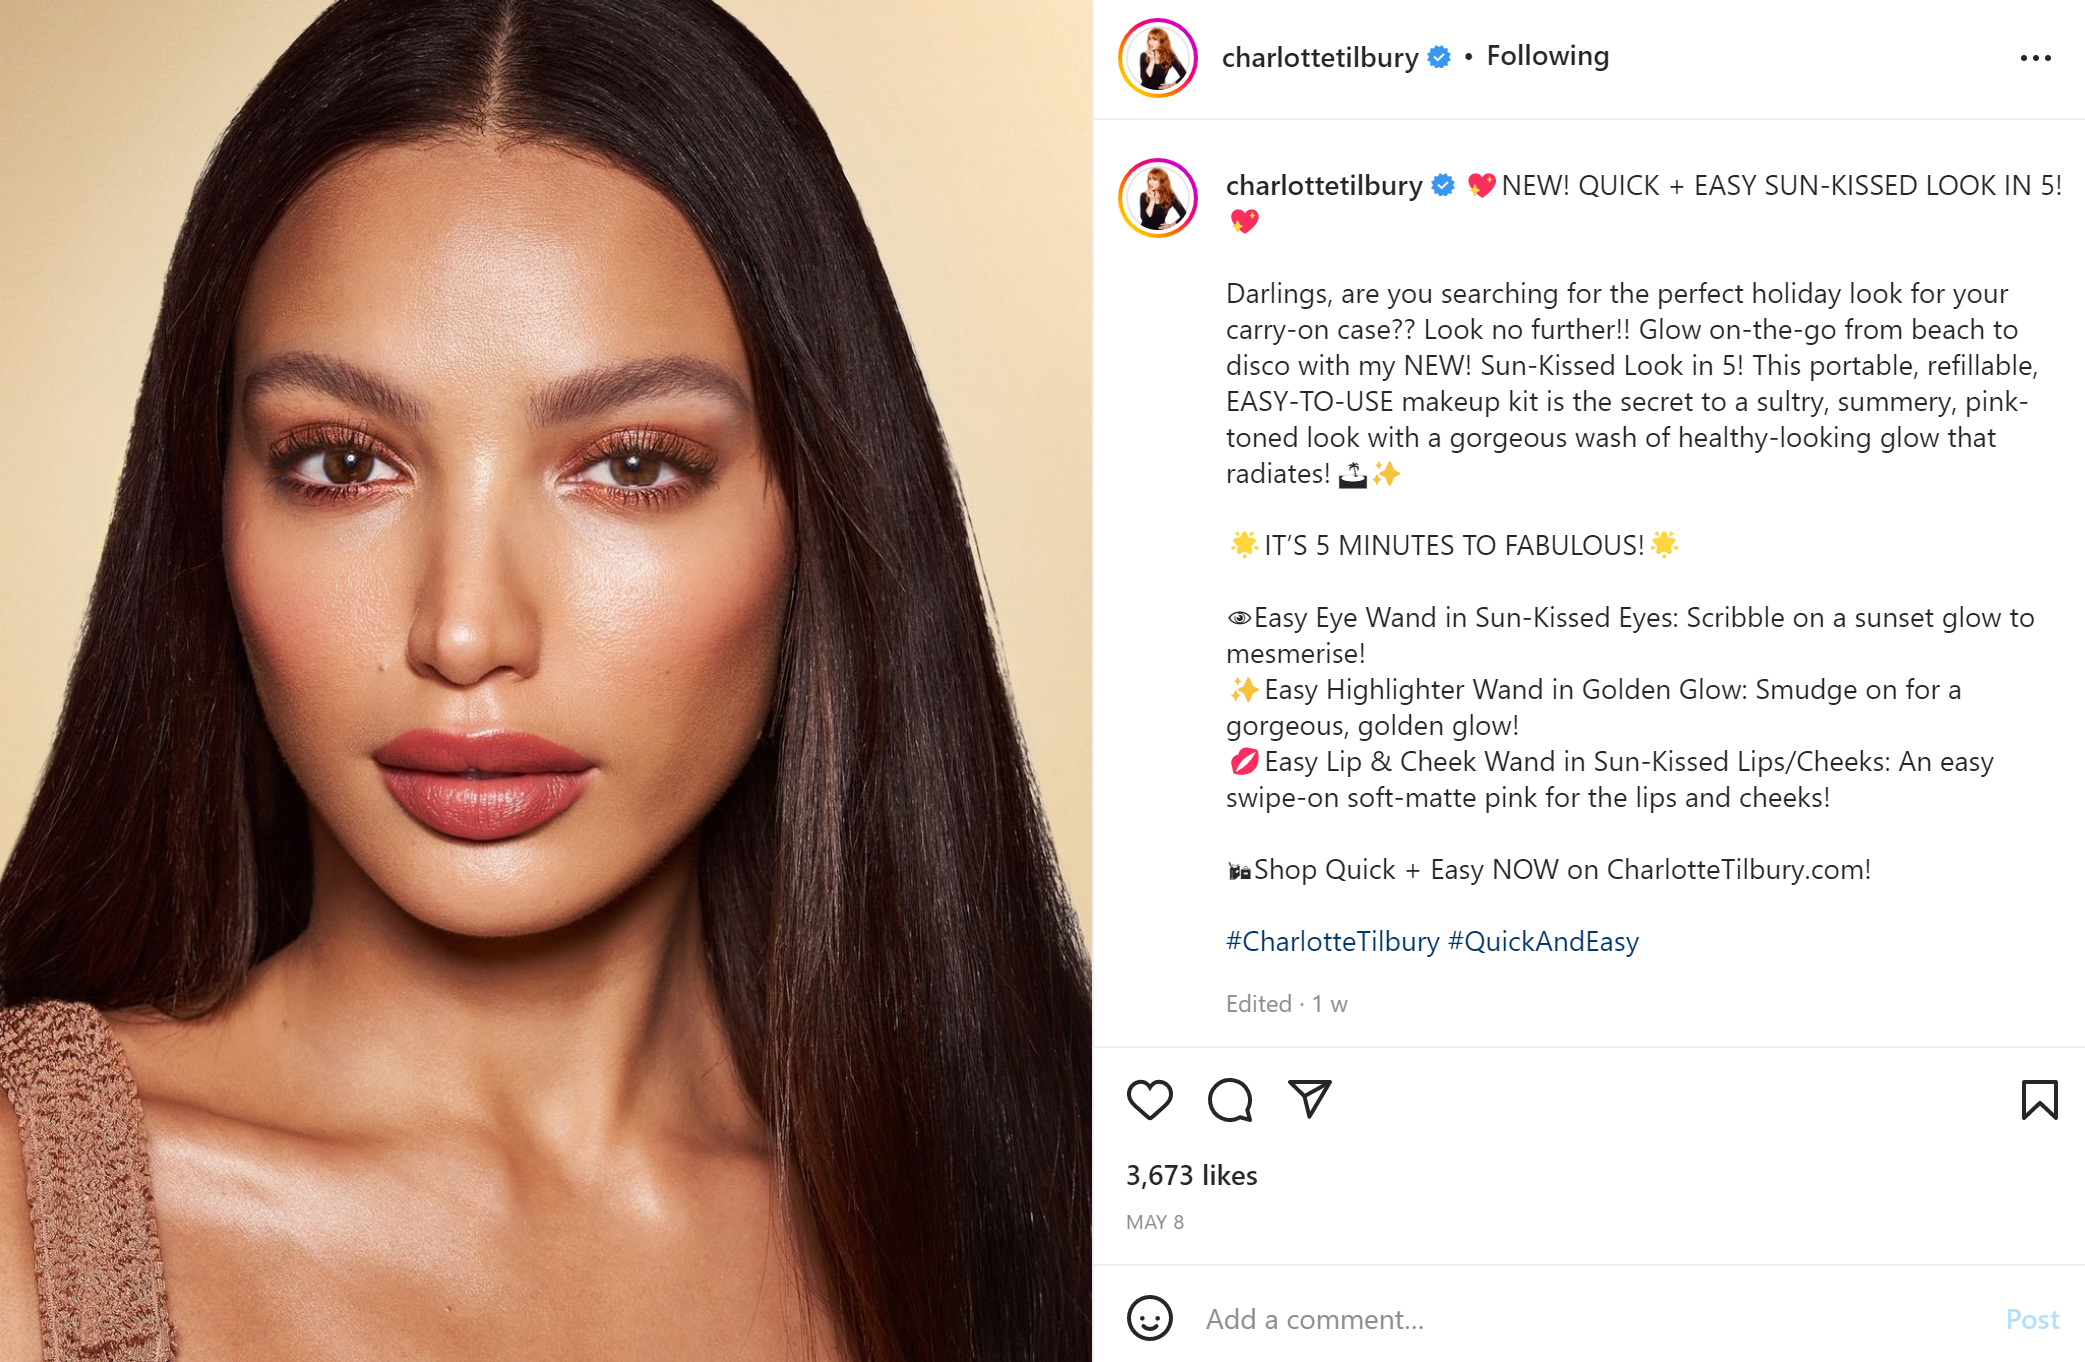 Can Charlotte Tilbury Beauty convince customers to download an app?